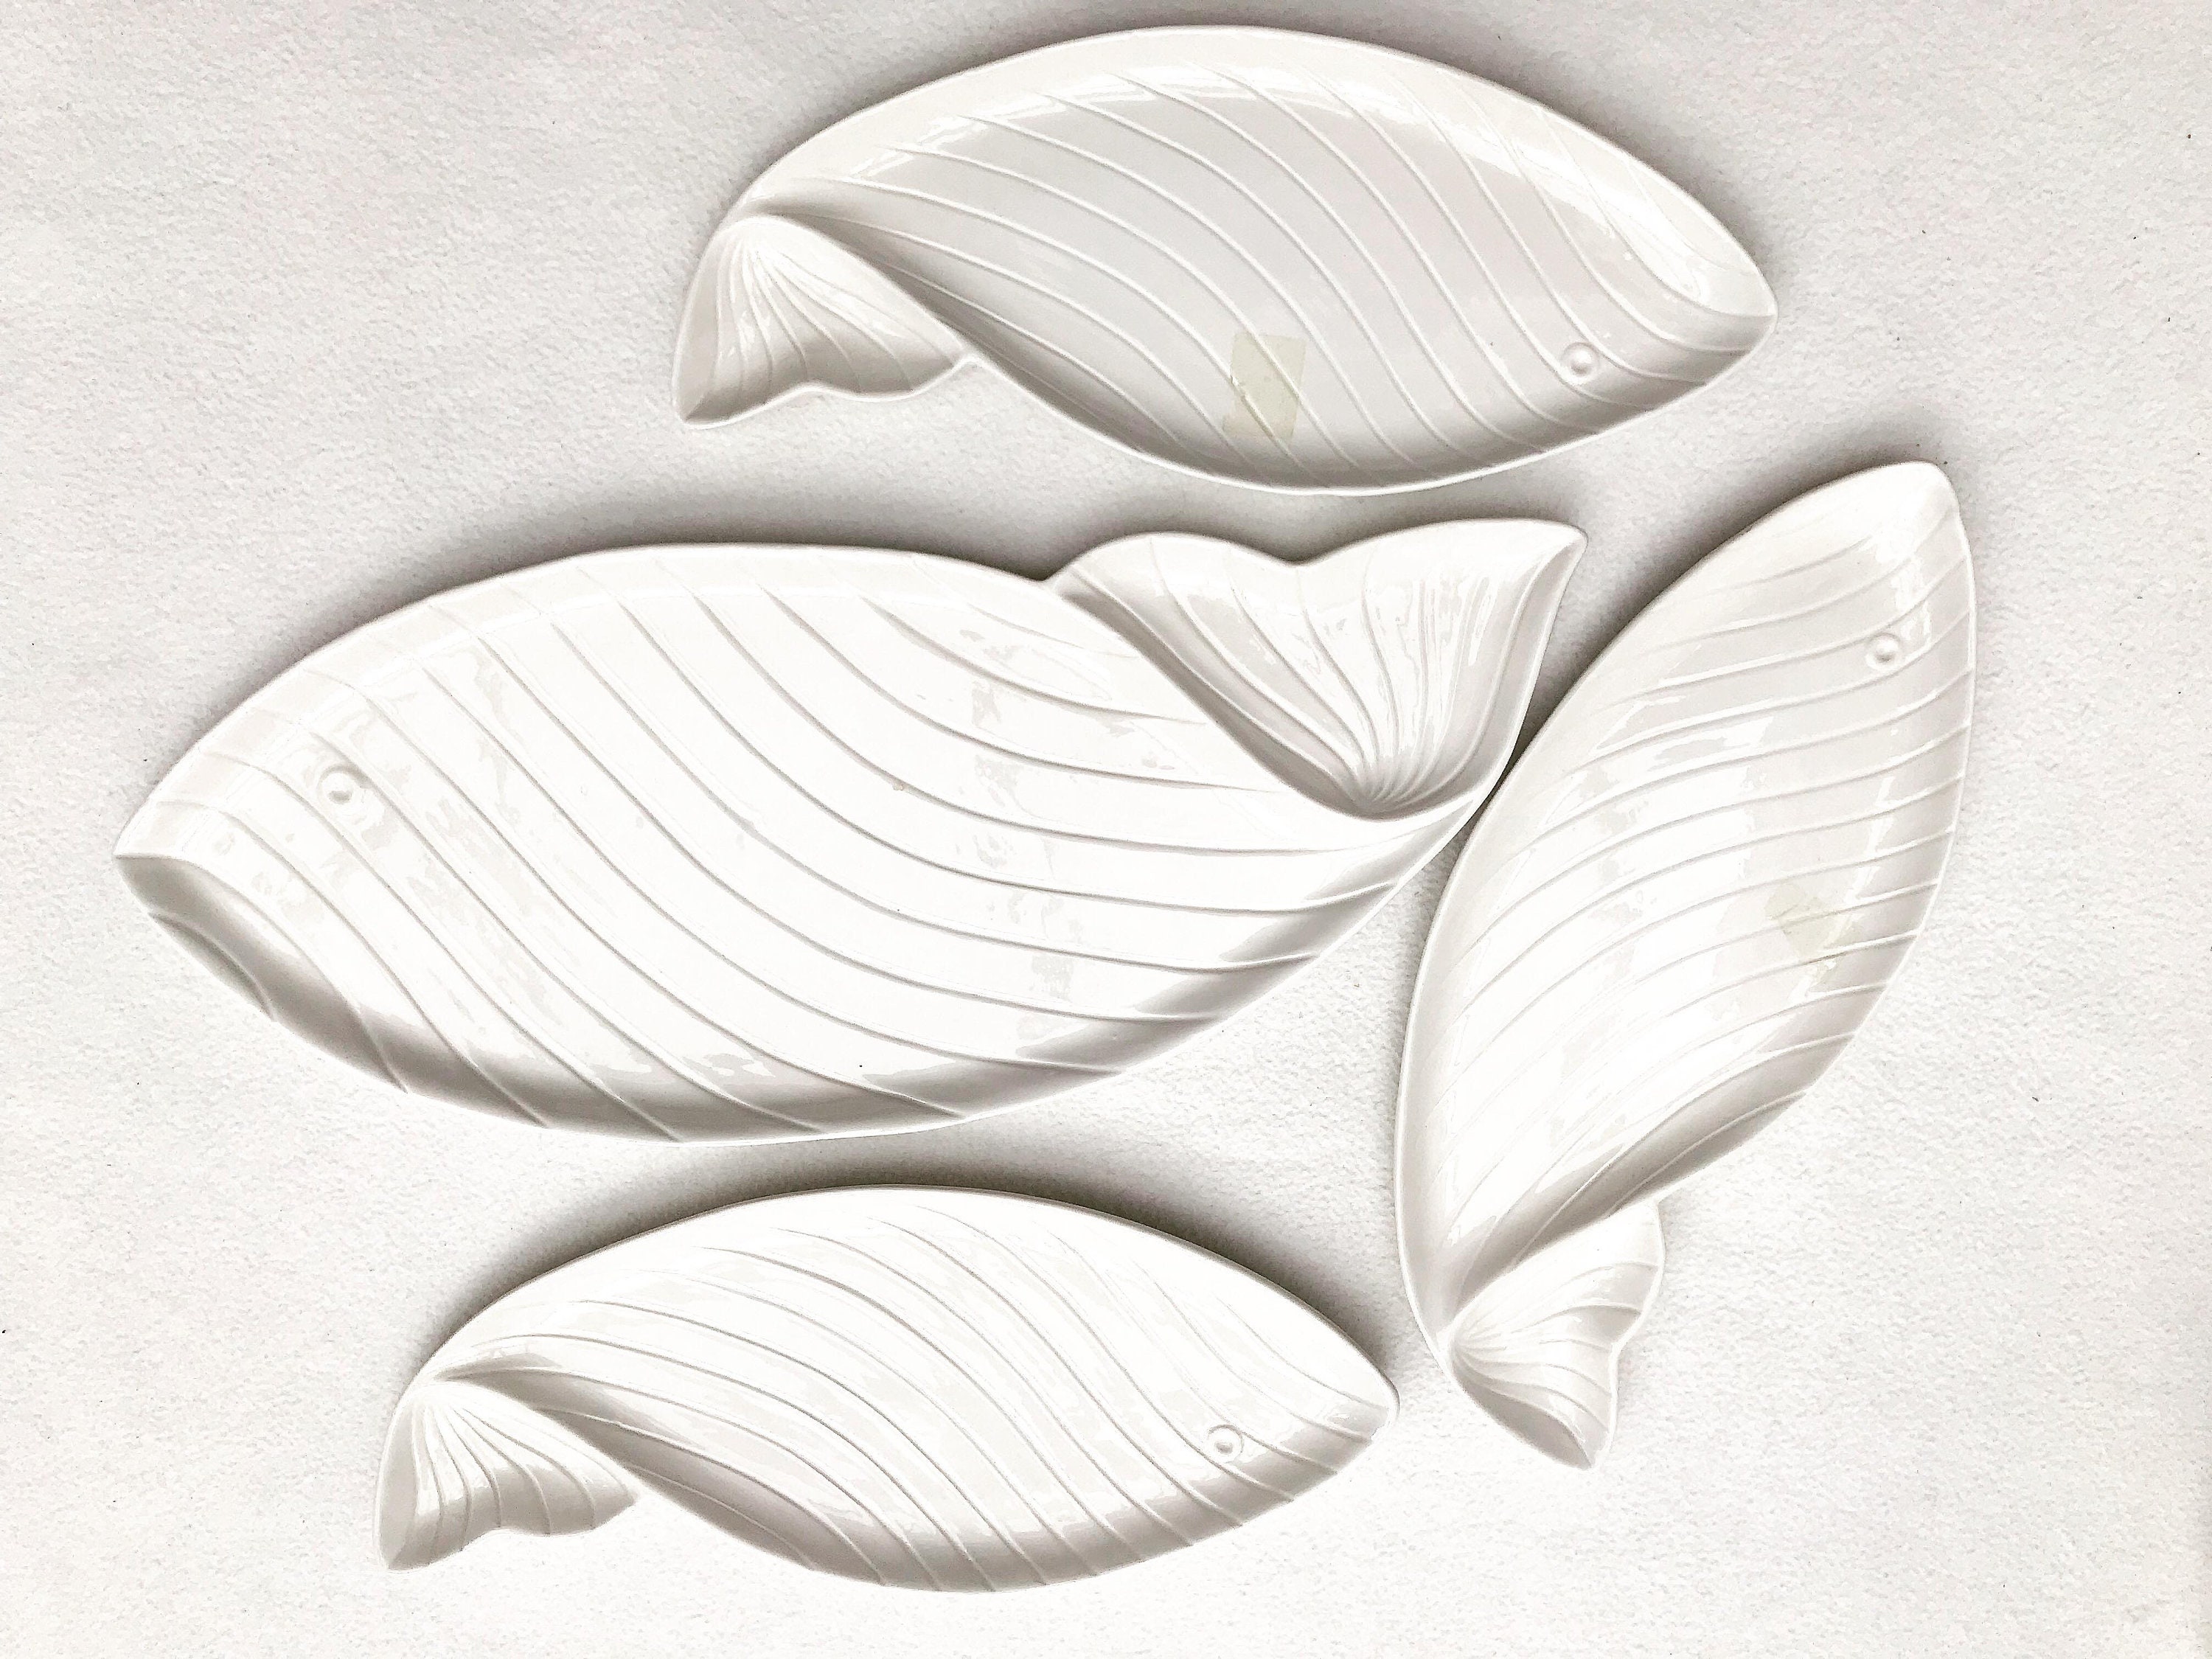 Nove Di Bassano Italian Ceramic Set 1960 White 1 Serving Tray & Fish Shaped Plates Christmas Table Decor White Gift For Her Seafood